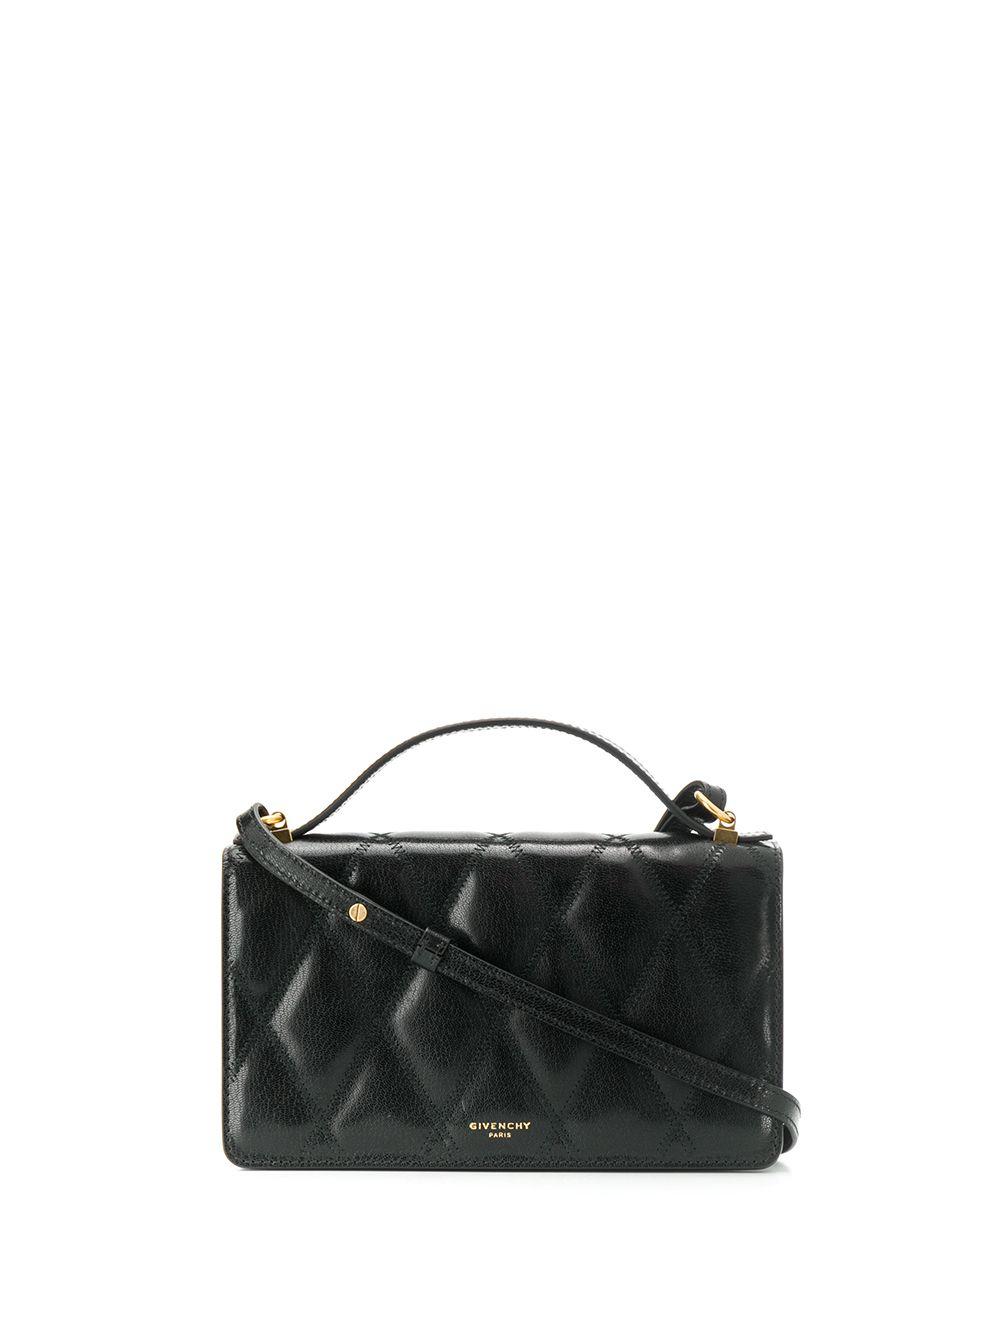 Givenchy Gv3 Leather Strap Wallet in Black | Lyst